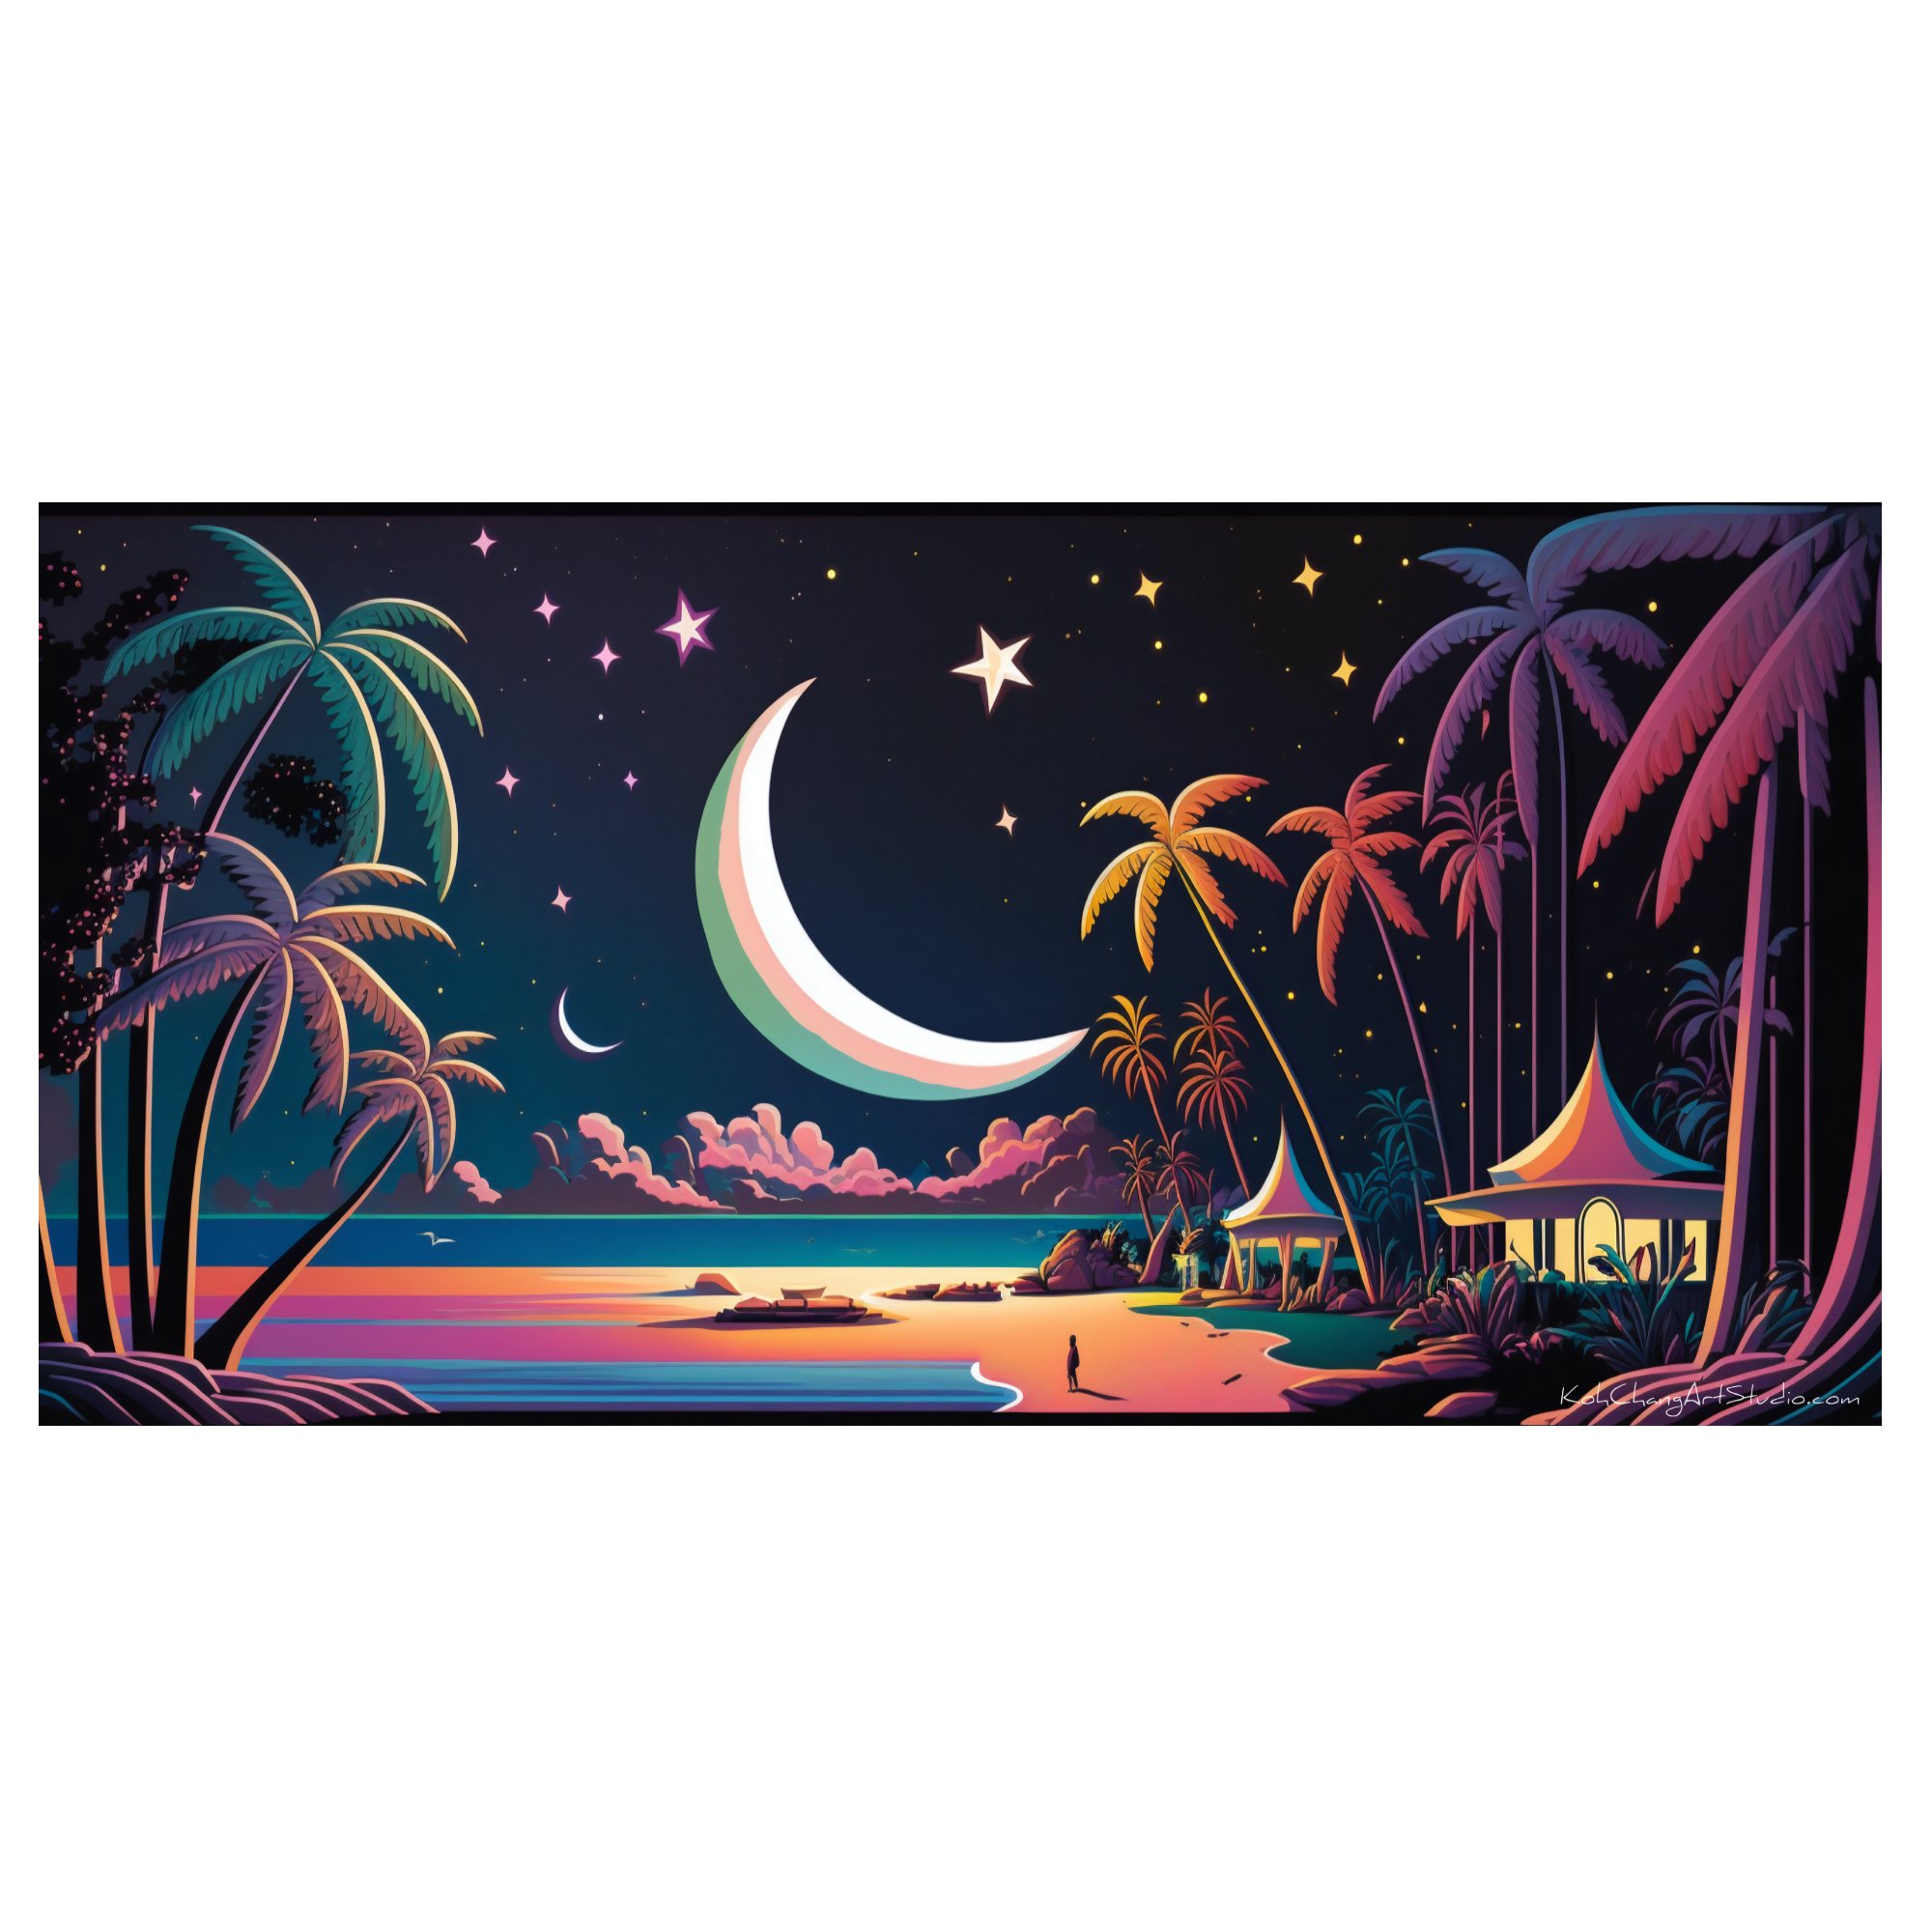 SKYWARD SERENADE Artistic Vision - Luminous sky with silhouettes of tropics and playful crescents.